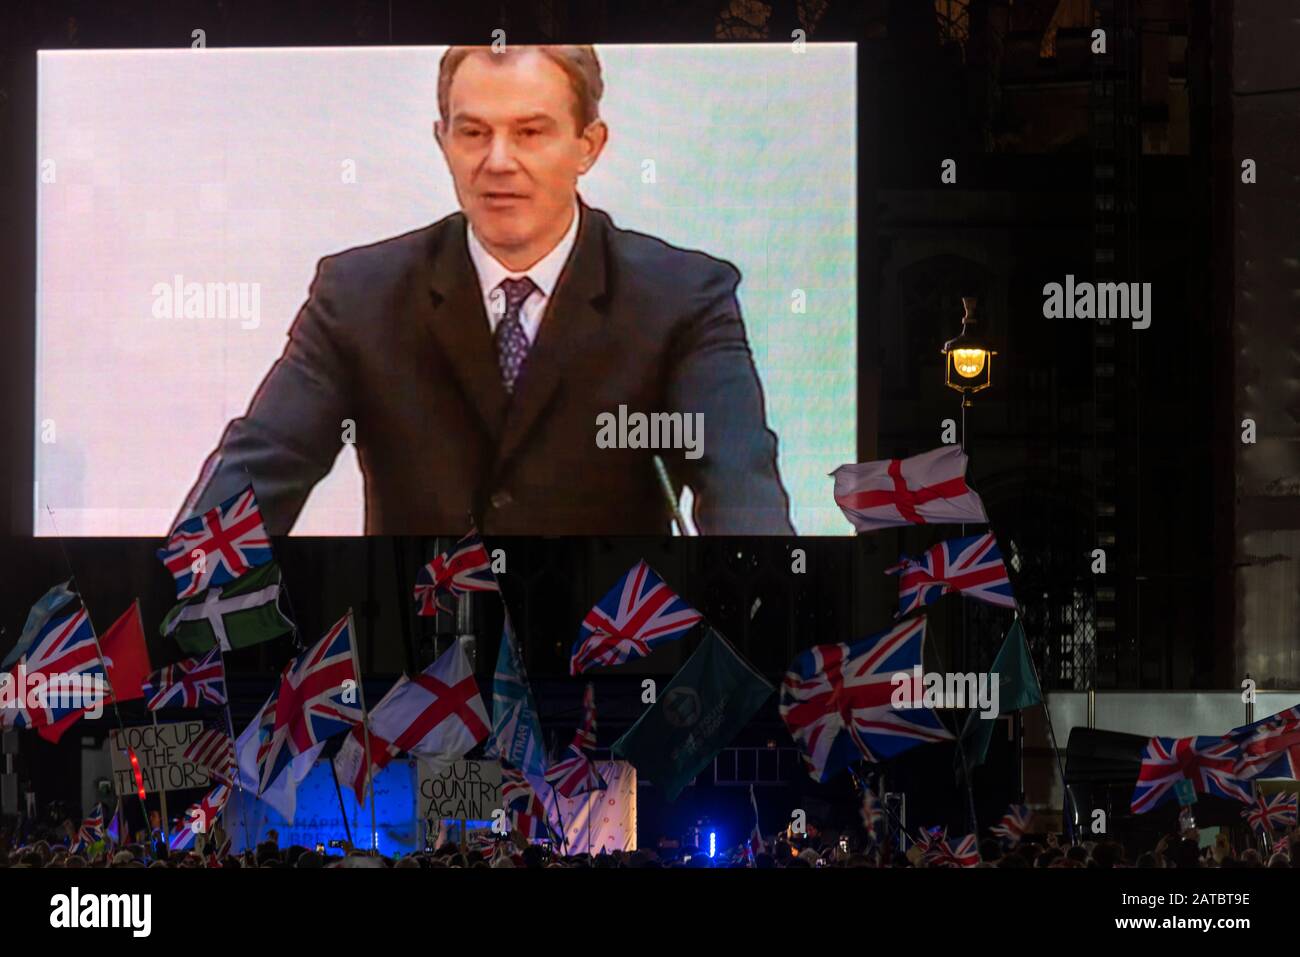 Tony Blair PM recording played to crowds on the big screen at the celebration event in Parliament Square on Brexit Day, 31 January 2020, in London, UK Stock Photo